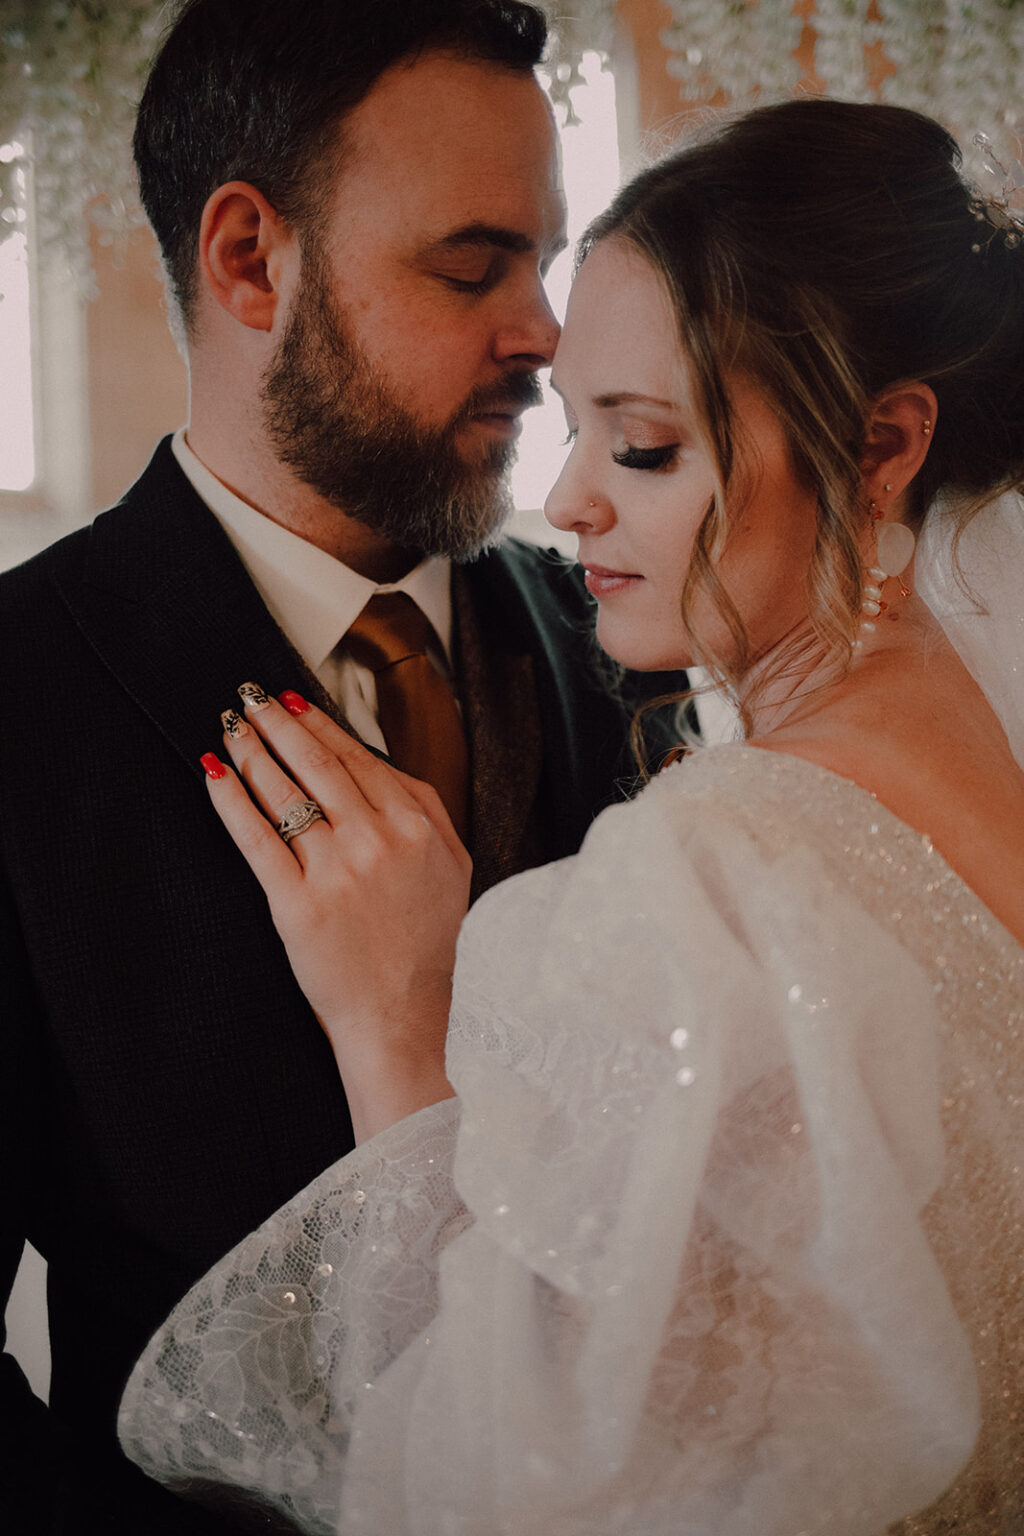 Intimate Autumn Wedding With Pre-Loved Wedding Dress At Sneaton Castle